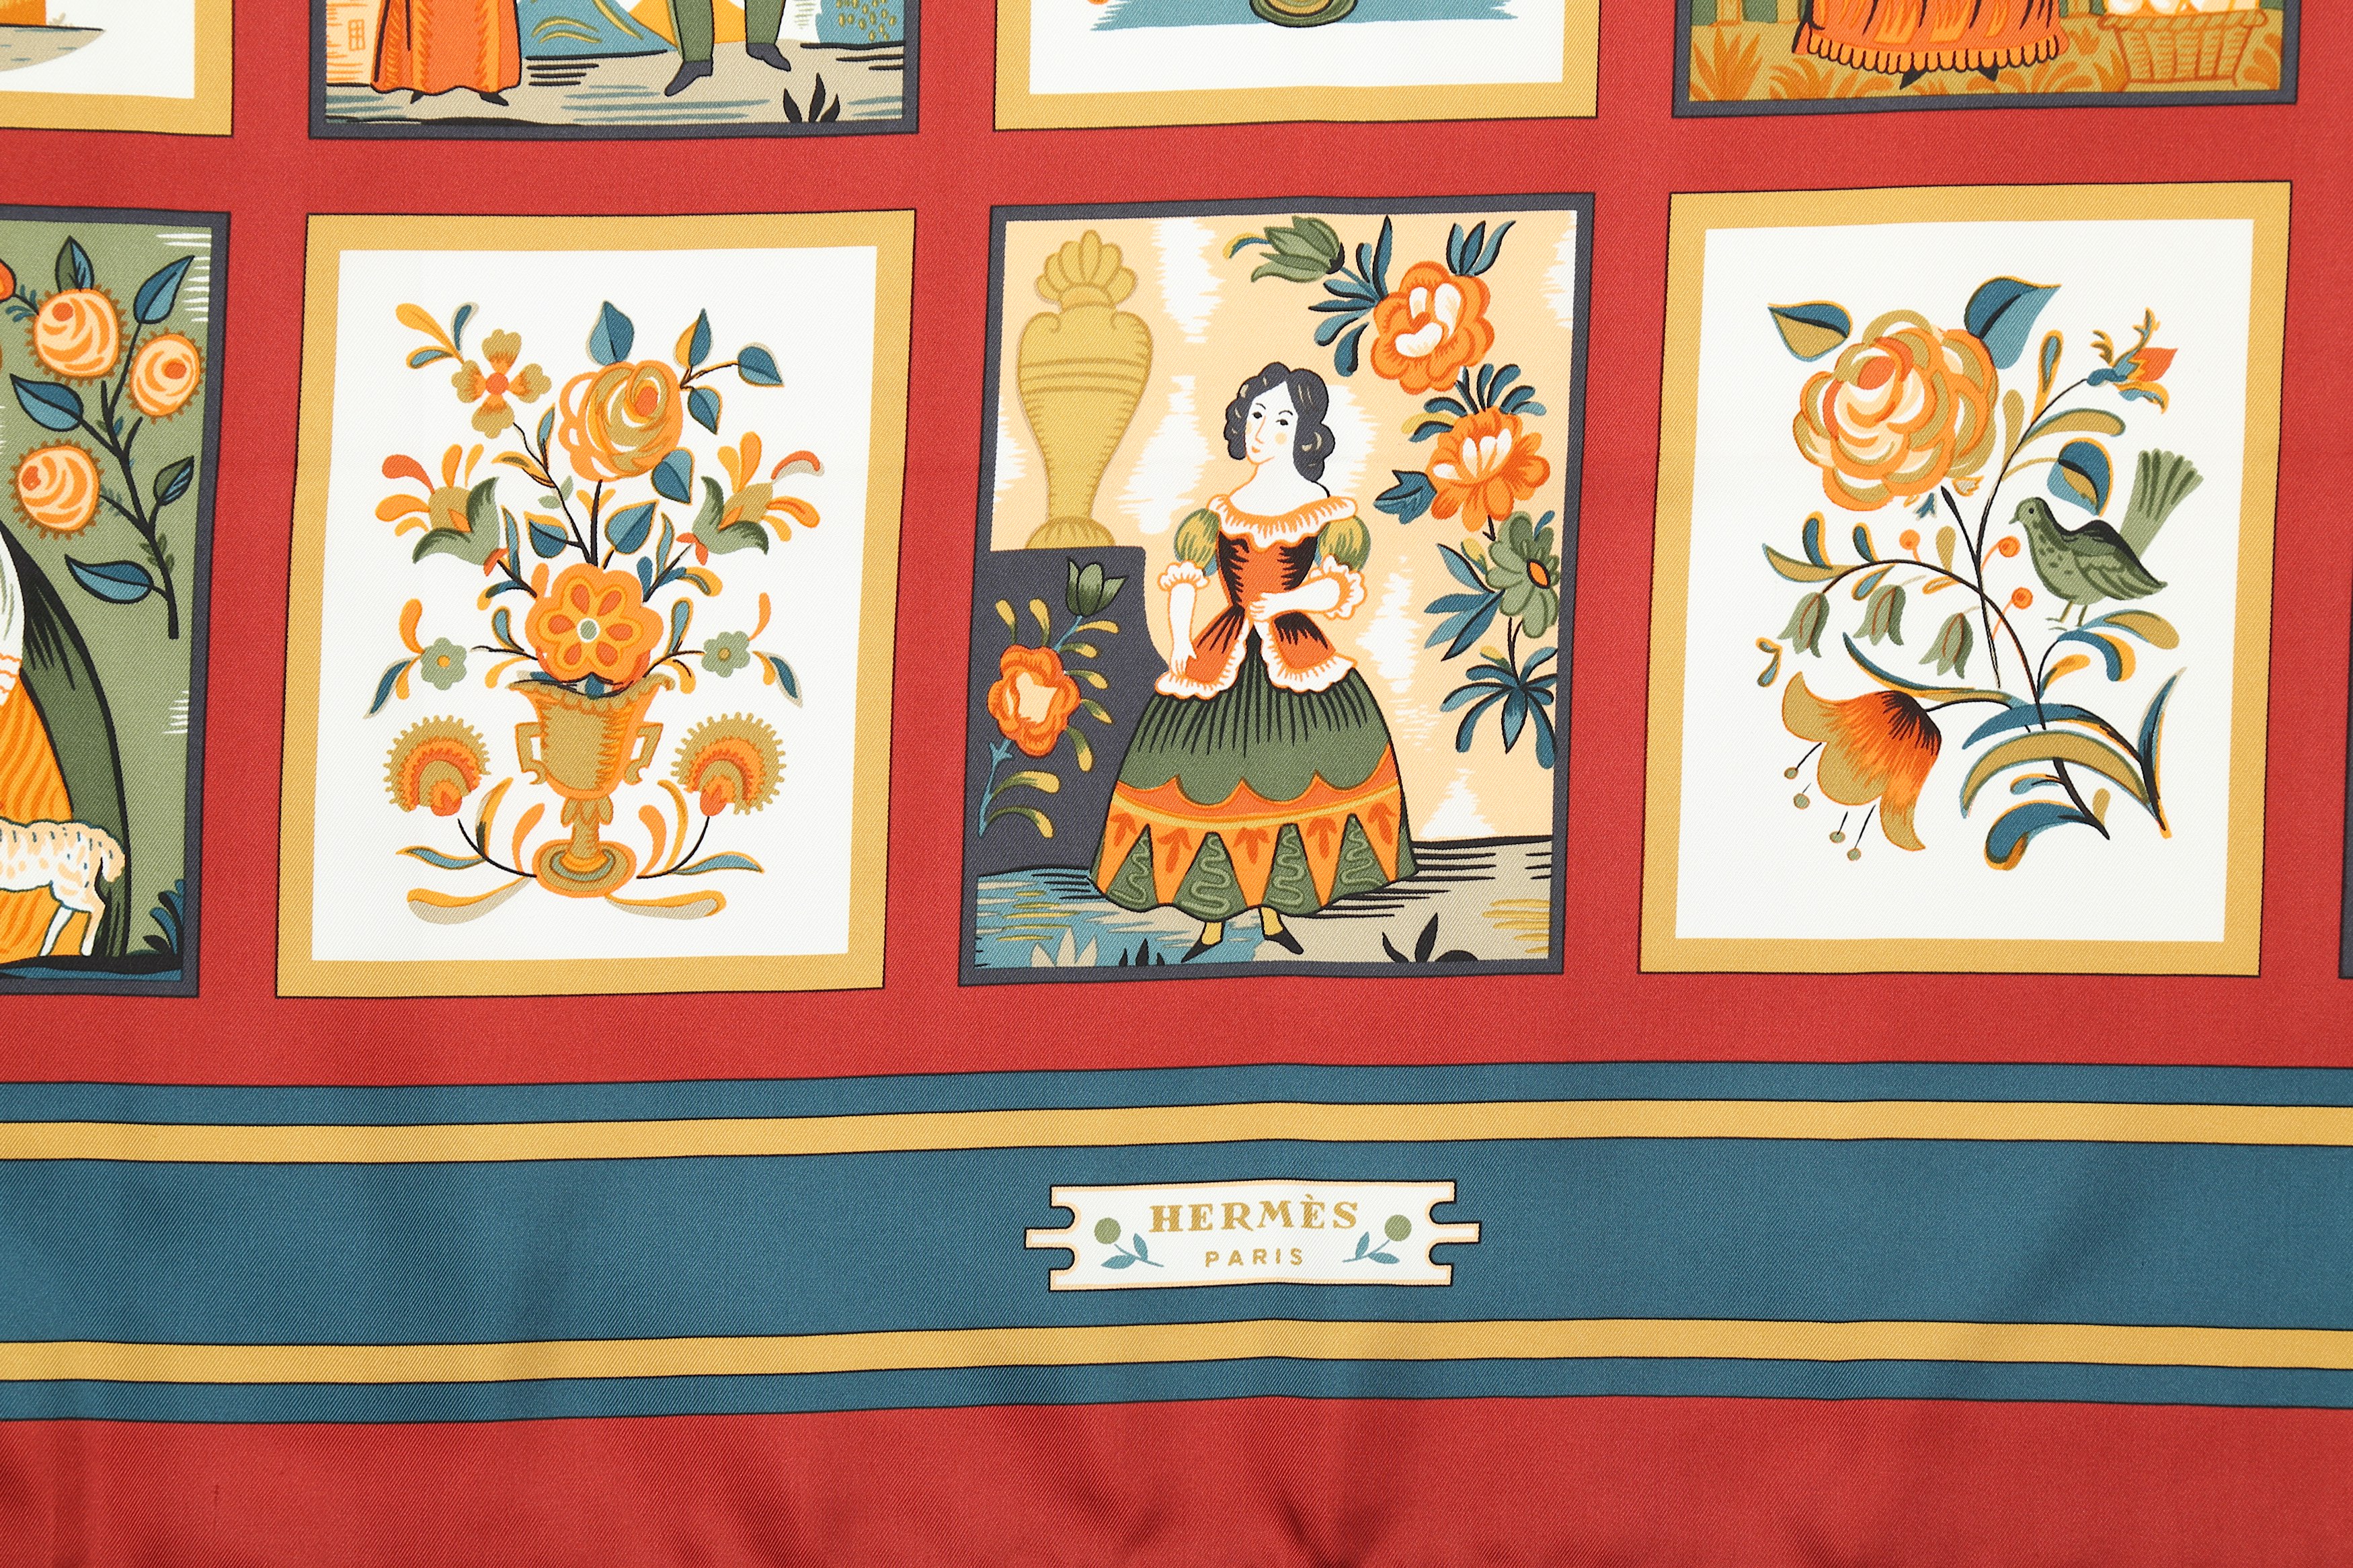 Hermes 'Imagerie' Silk Scarf - Image 2 of 4